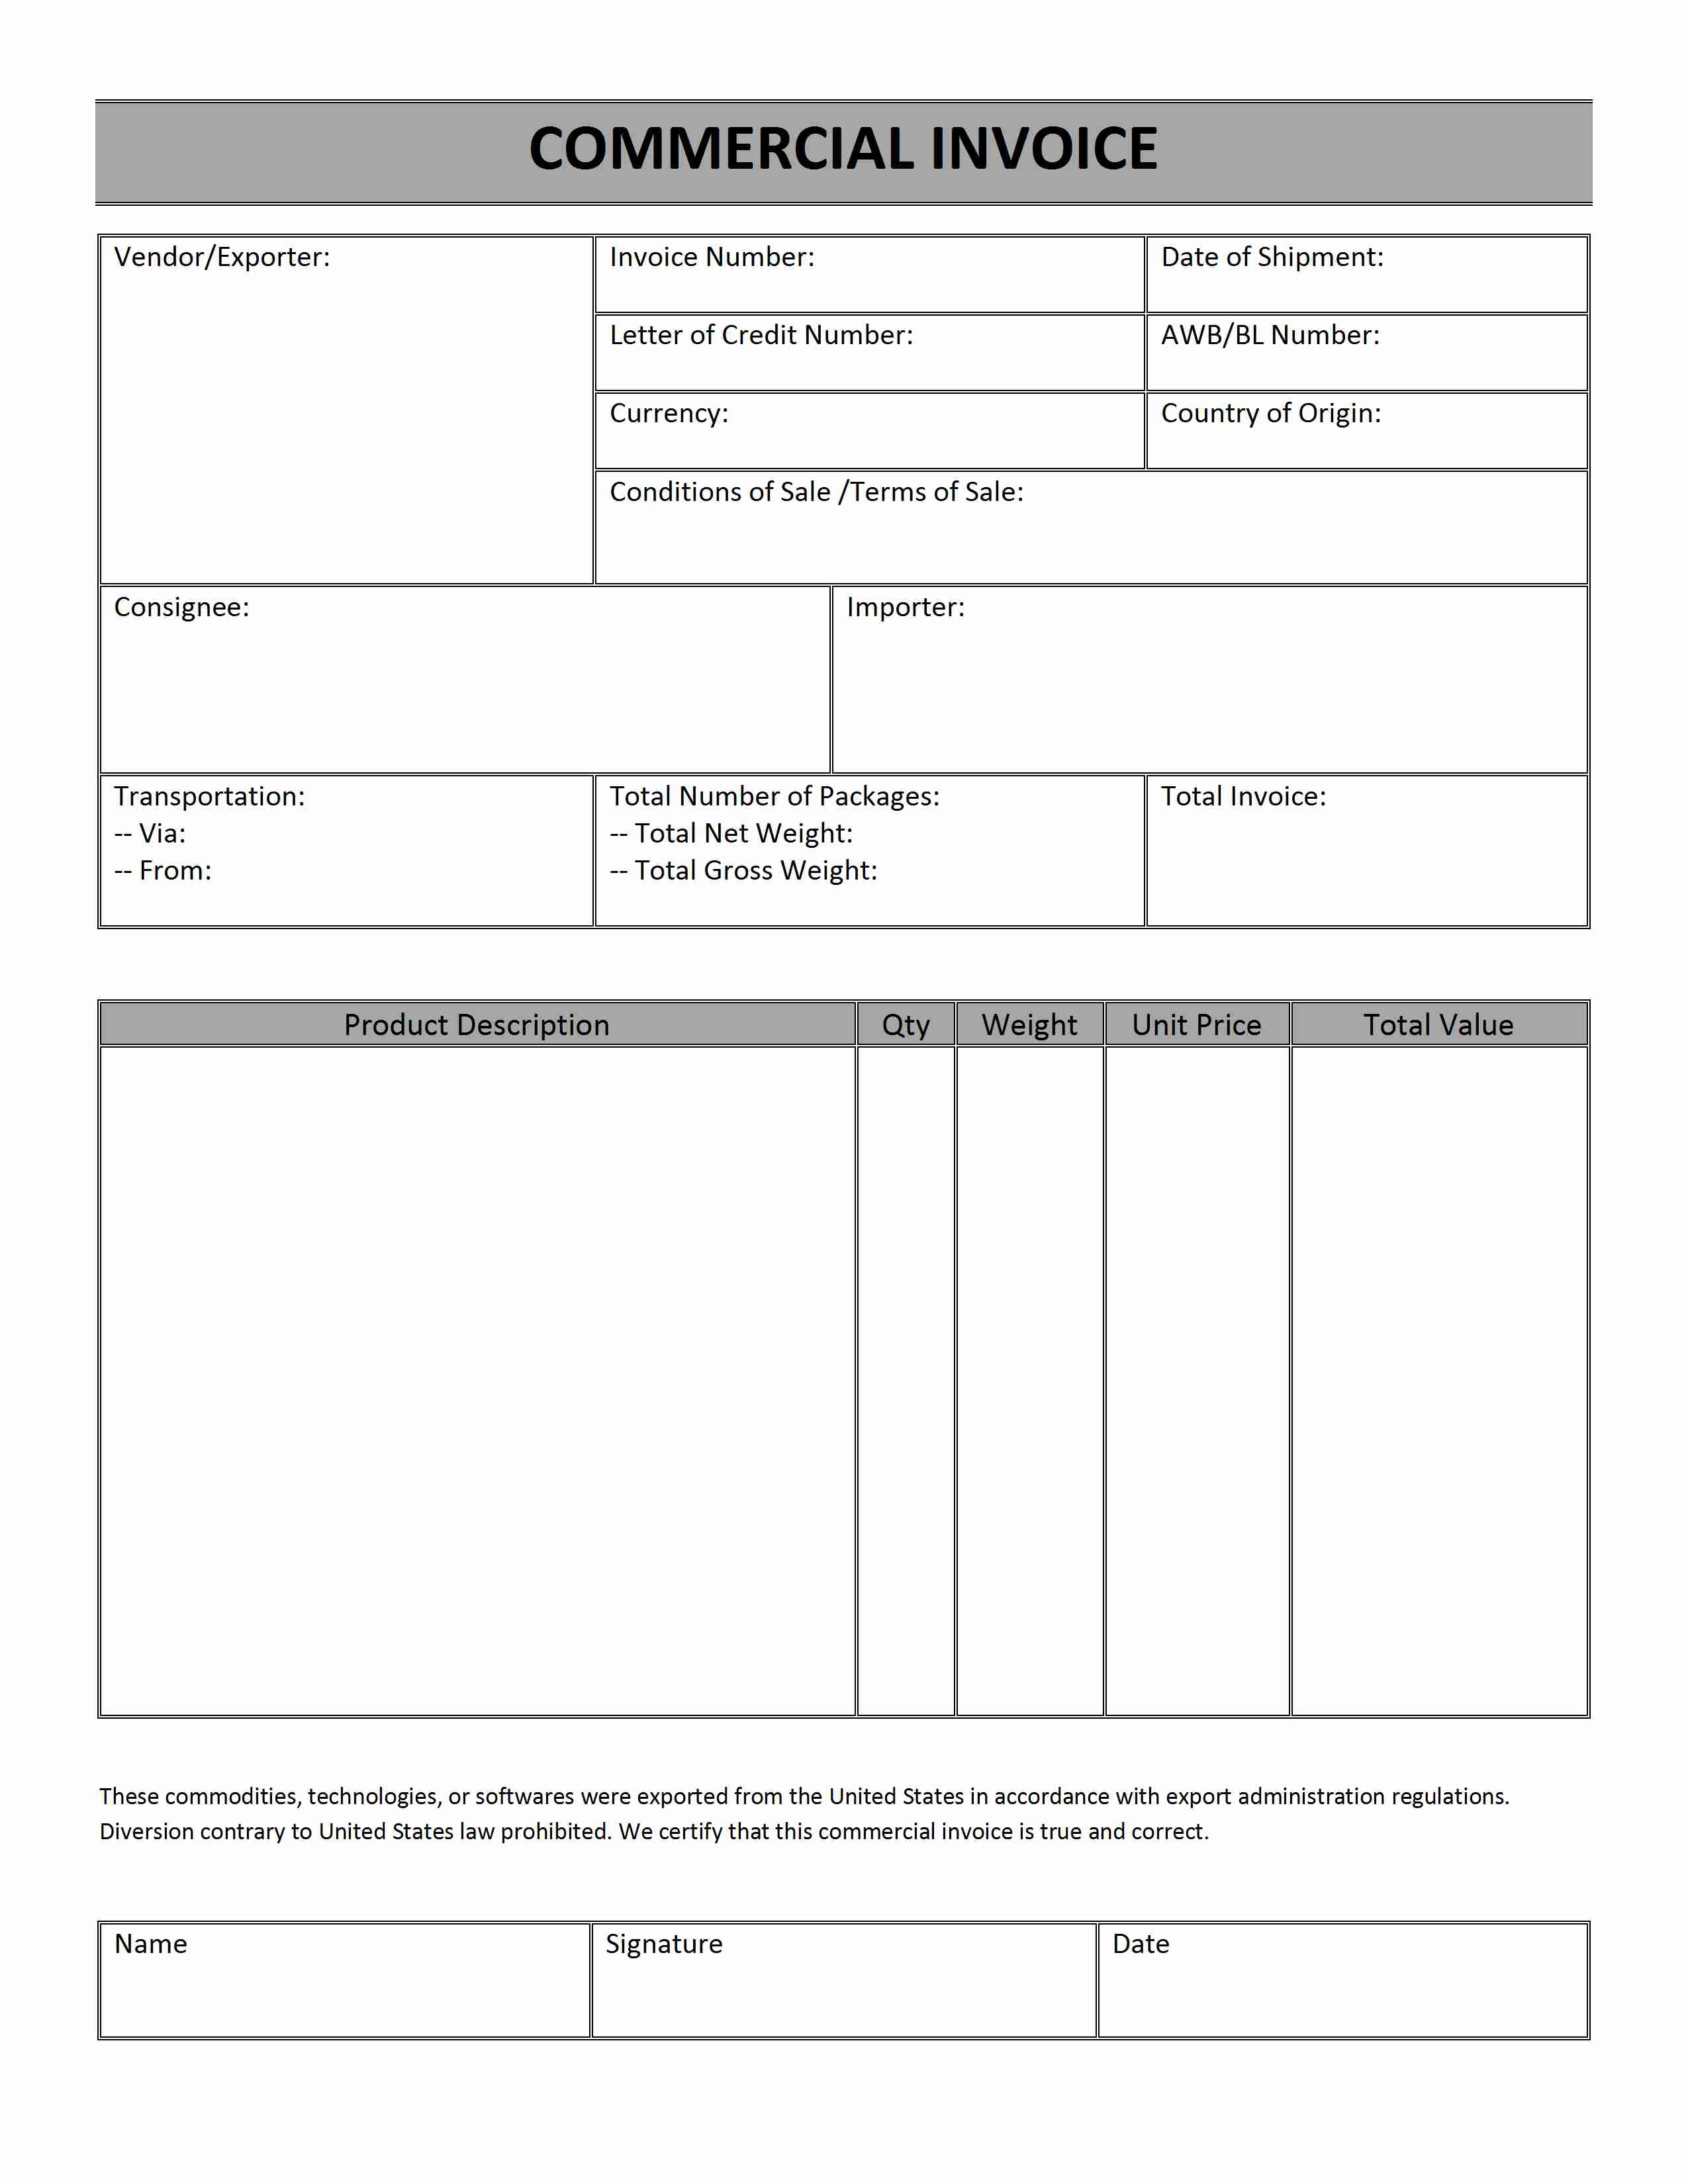 commercial invoice commercial invoice template fee download pdf commercial invoice template pdf